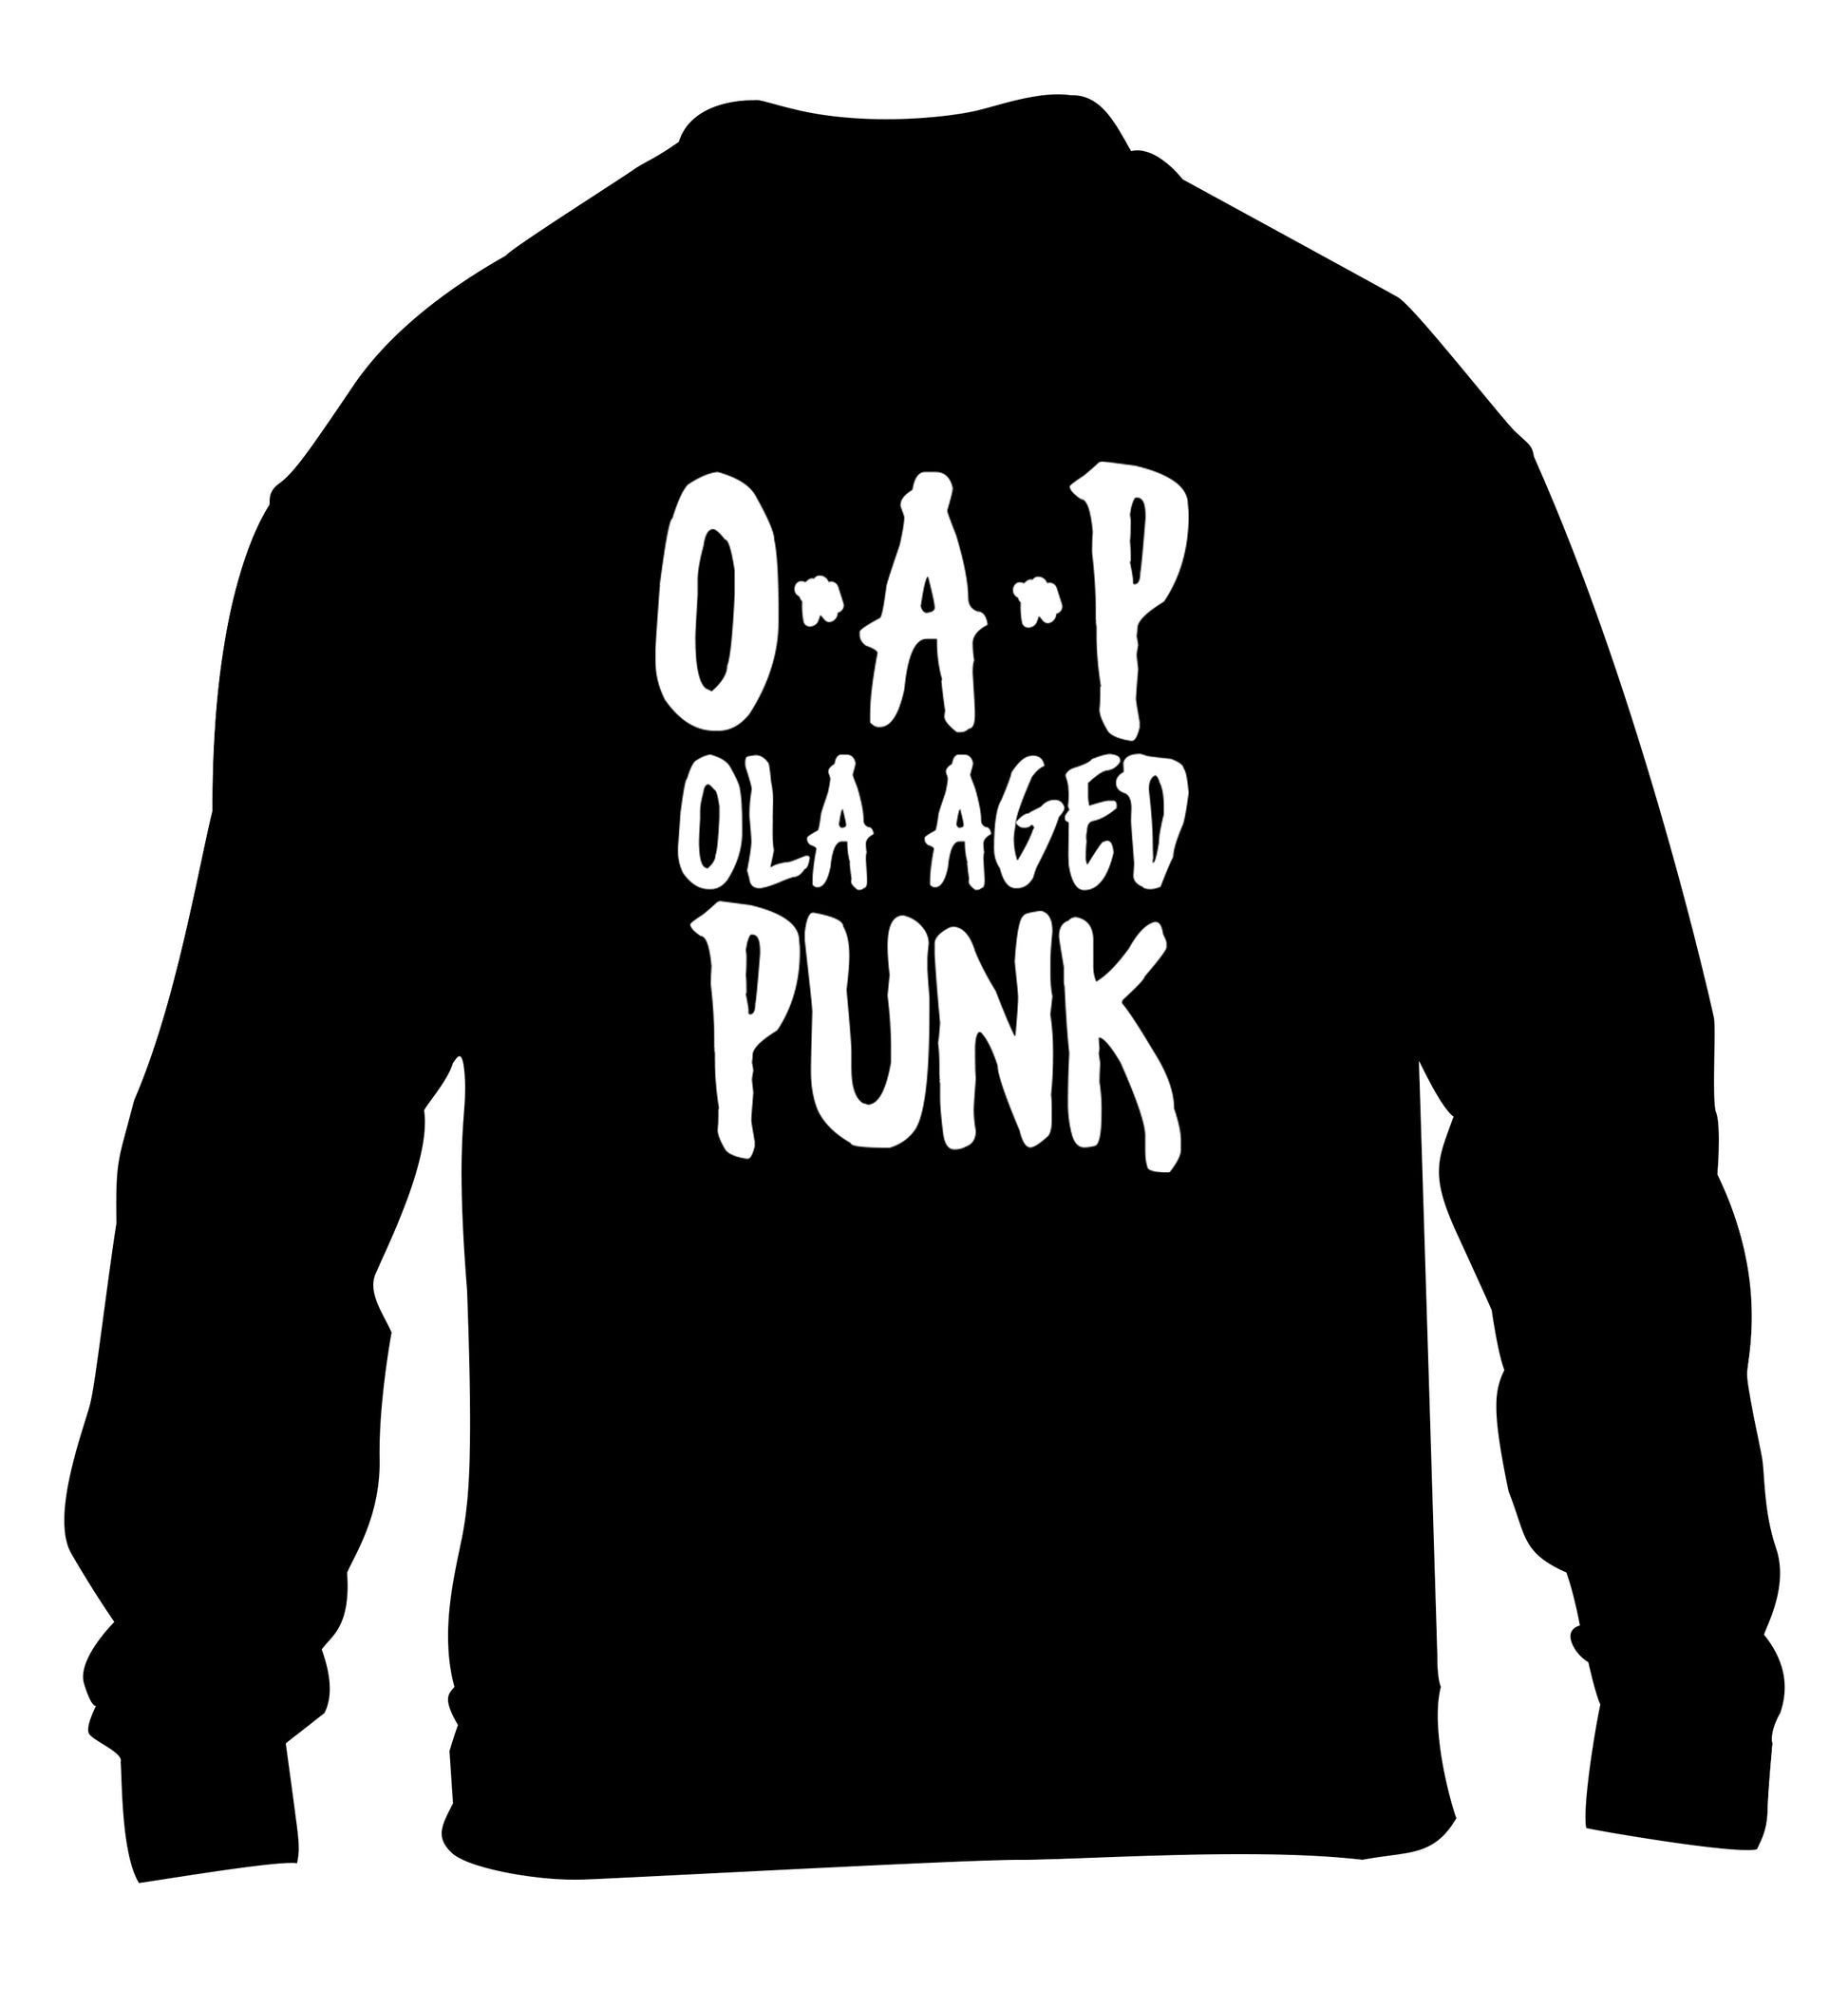 O.A.P Old Aged Punk children's black sweater 12-13 Years